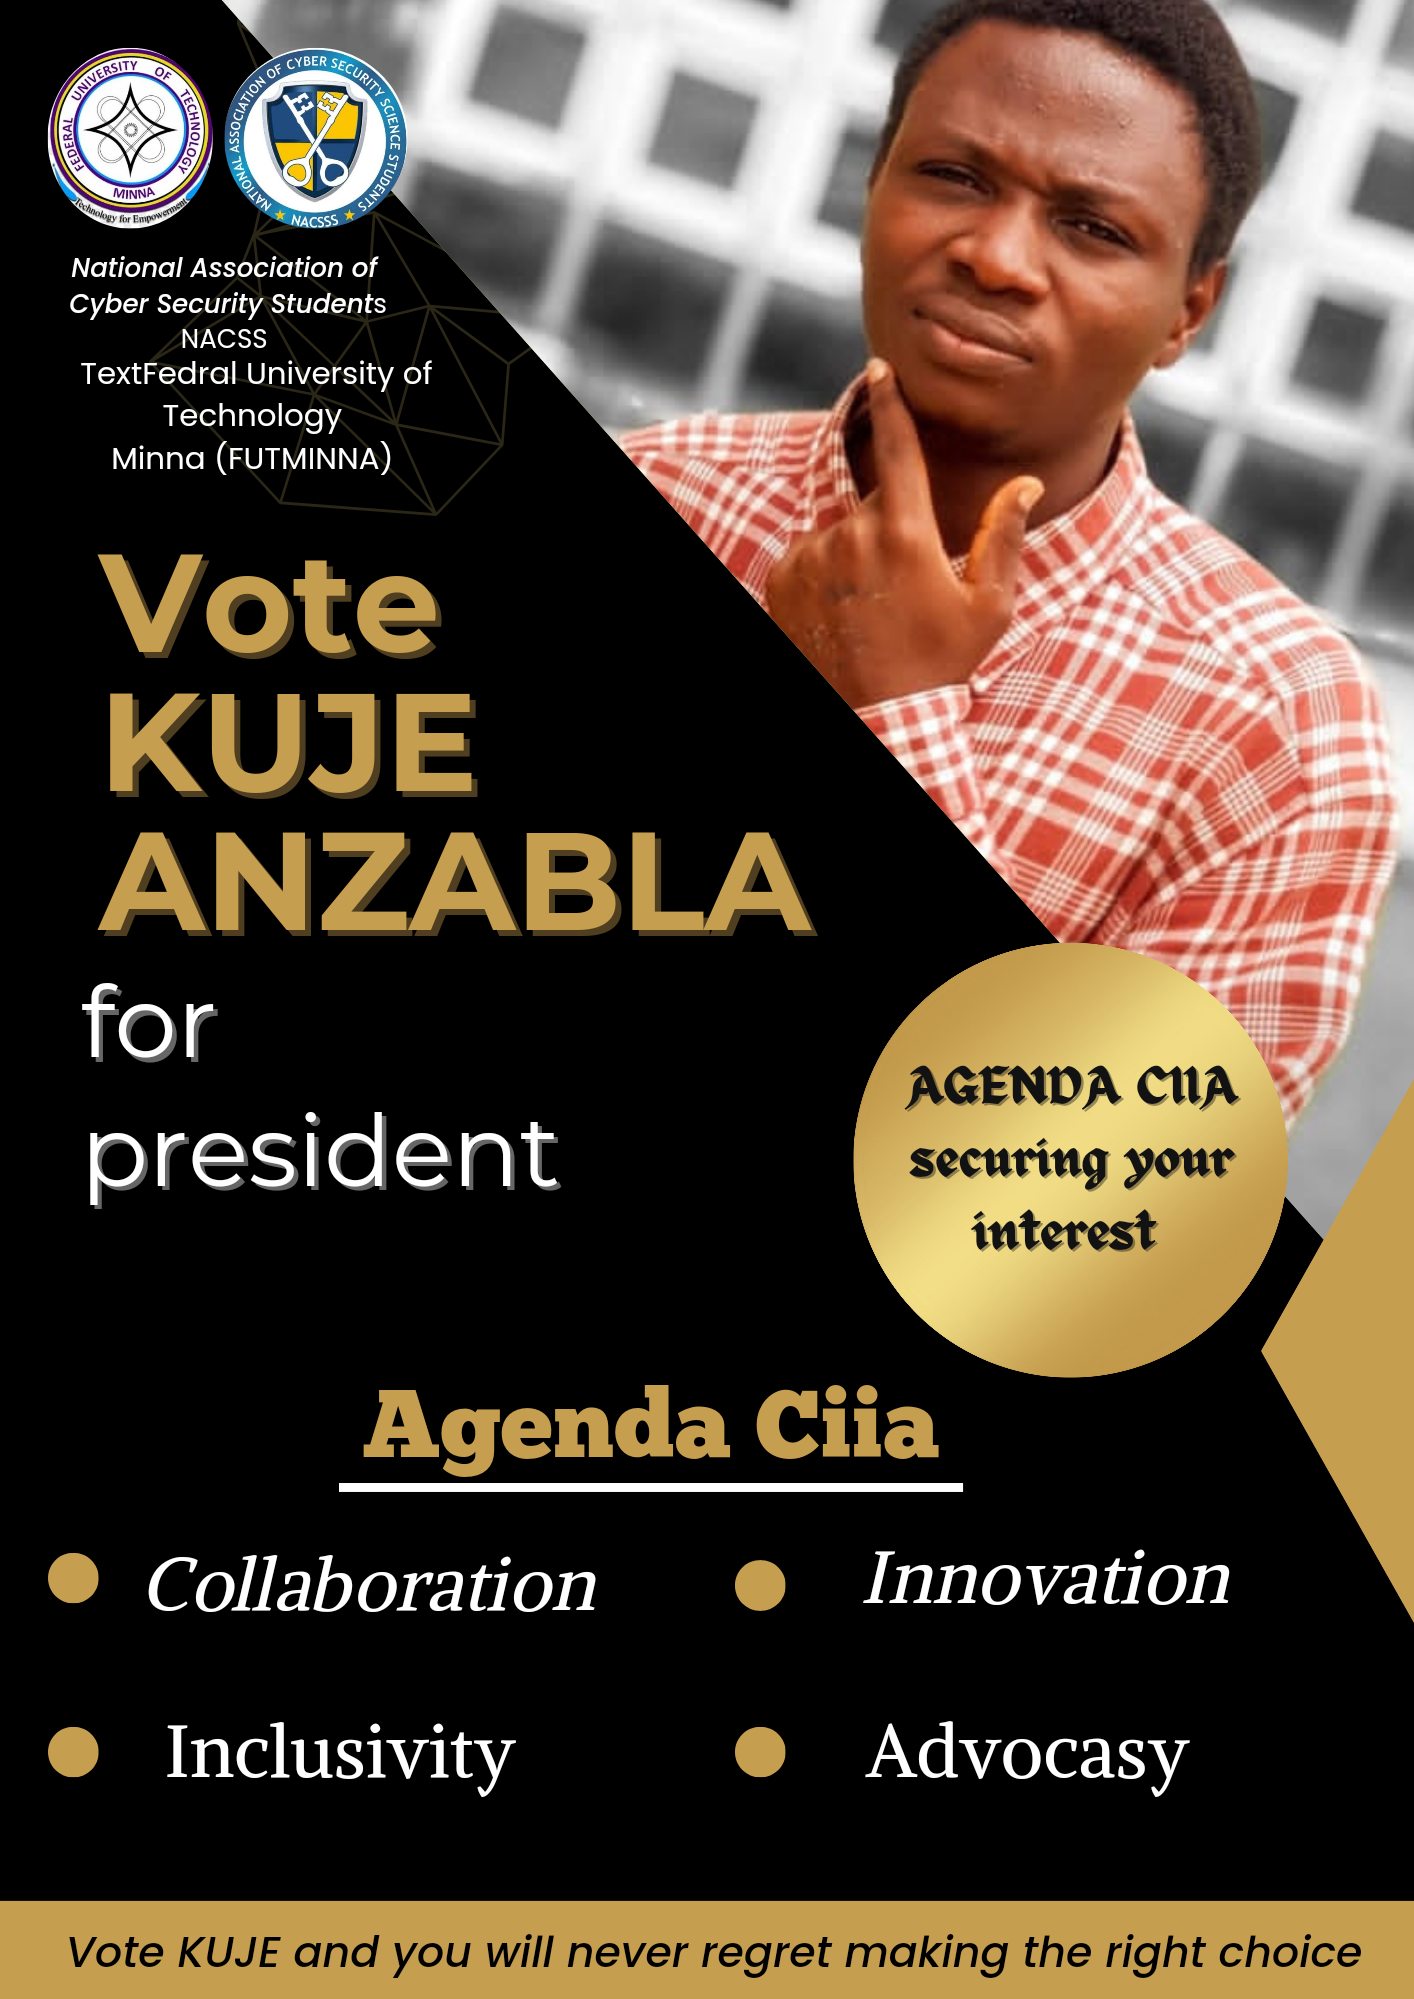 National Association of
Cyber Security Students

ACSS
TextFedral University of
Technology
Minna (FUTMINNA)

Vote
KUJE
ANZABLA

for
A AGENDA CUA *
president securing your

interest

Agenda Ciia
® (Collaboration ® Innovation

® Inclusivity ® Advocasy

Vote KUJE and you will never regret making the right choice